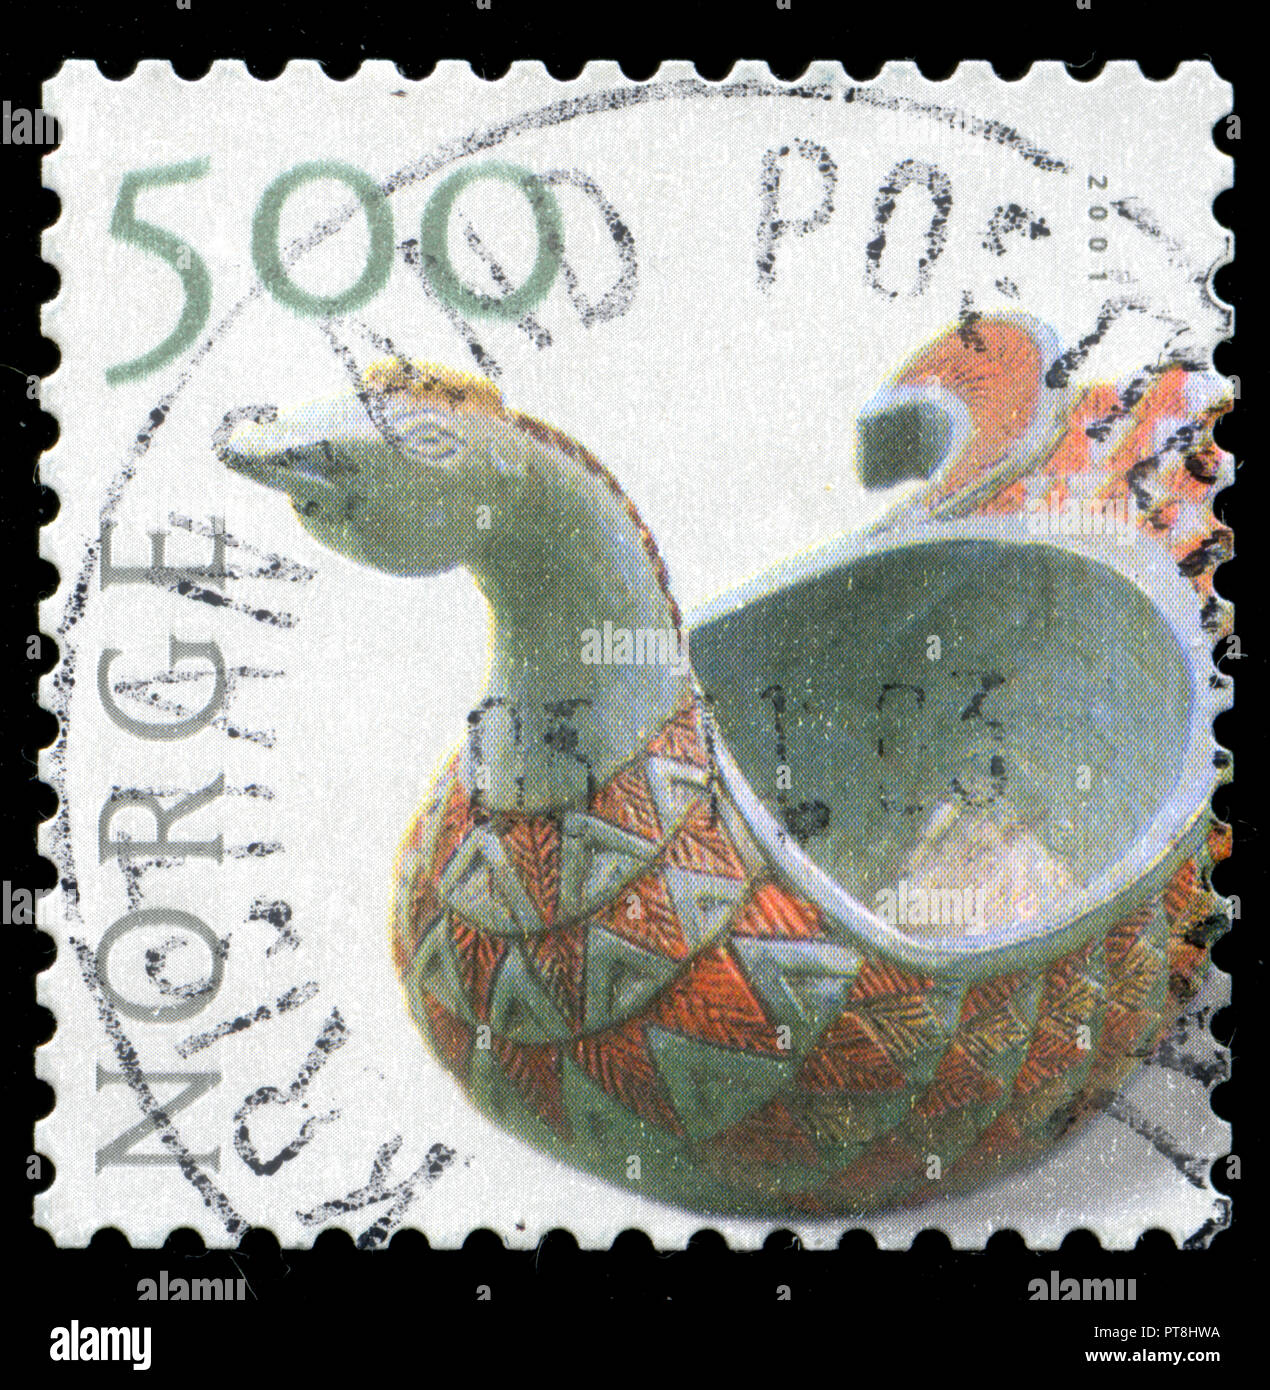 Postmarked stamp from Norway the Crafts series issued in 2001 Stock Photo